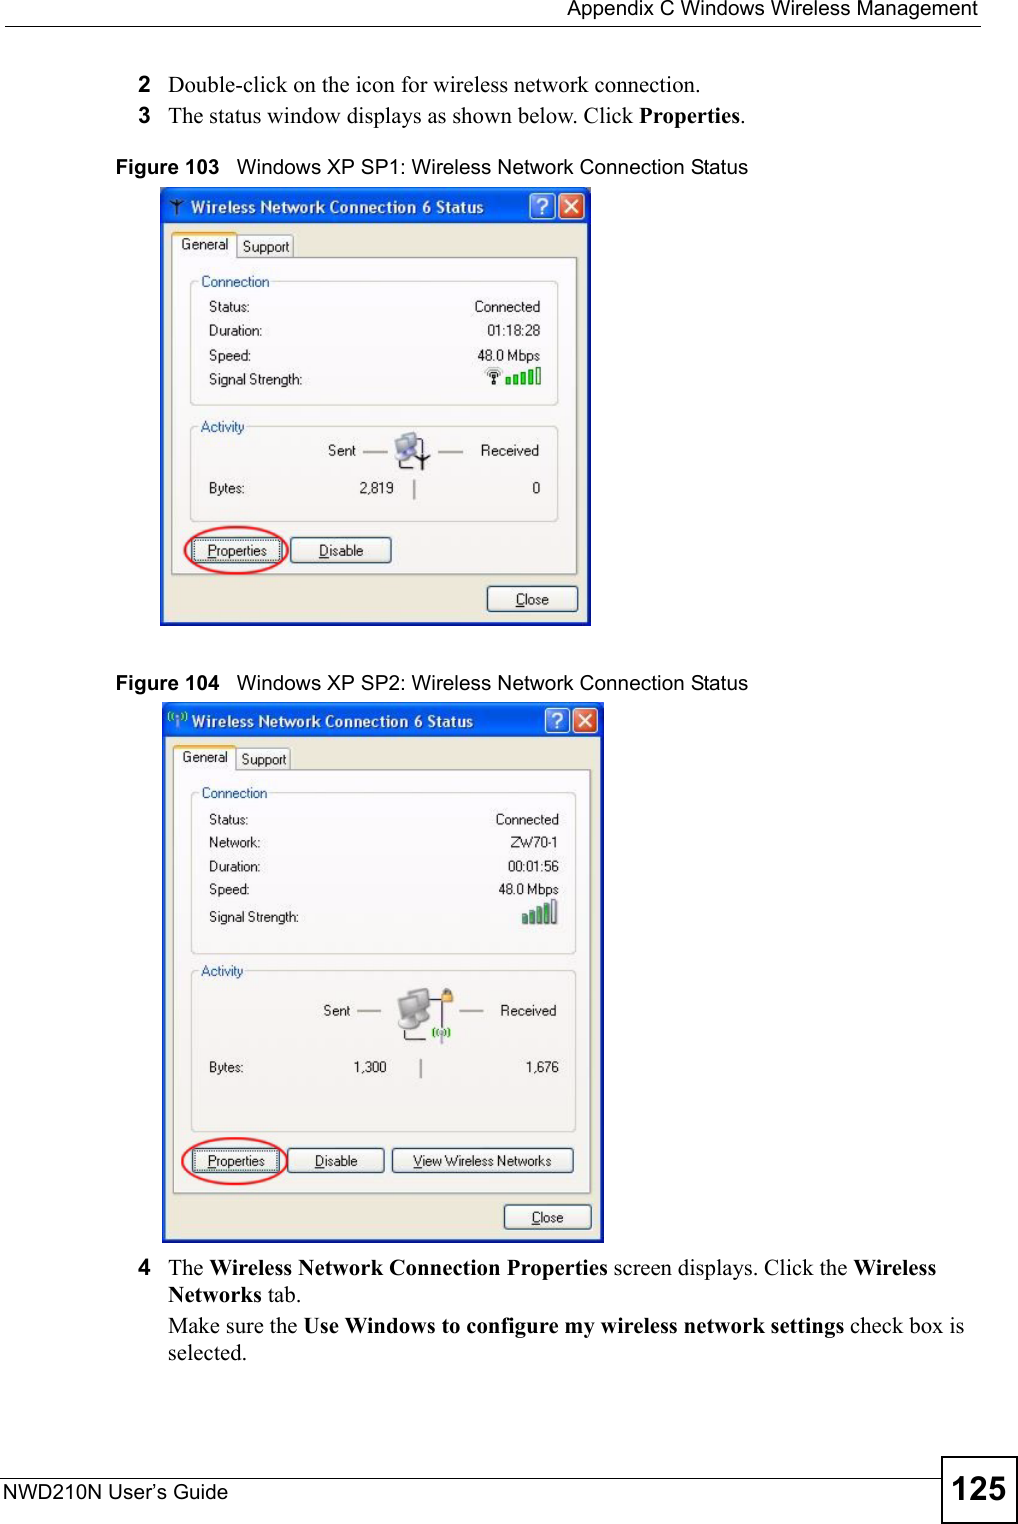  Appendix C Windows Wireless ManagementNWD210N User’s Guide 1252Double-click on the icon for wireless network connection.3The status window displays as shown below. Click Properties.Figure 103   Windows XP SP1: Wireless Network Connection StatusFigure 104   Windows XP SP2: Wireless Network Connection Status4The Wireless Network Connection Properties screen displays. Click the Wireless Networks tab.Make sure the Use Windows to configure my wireless network settings check box is selected.  